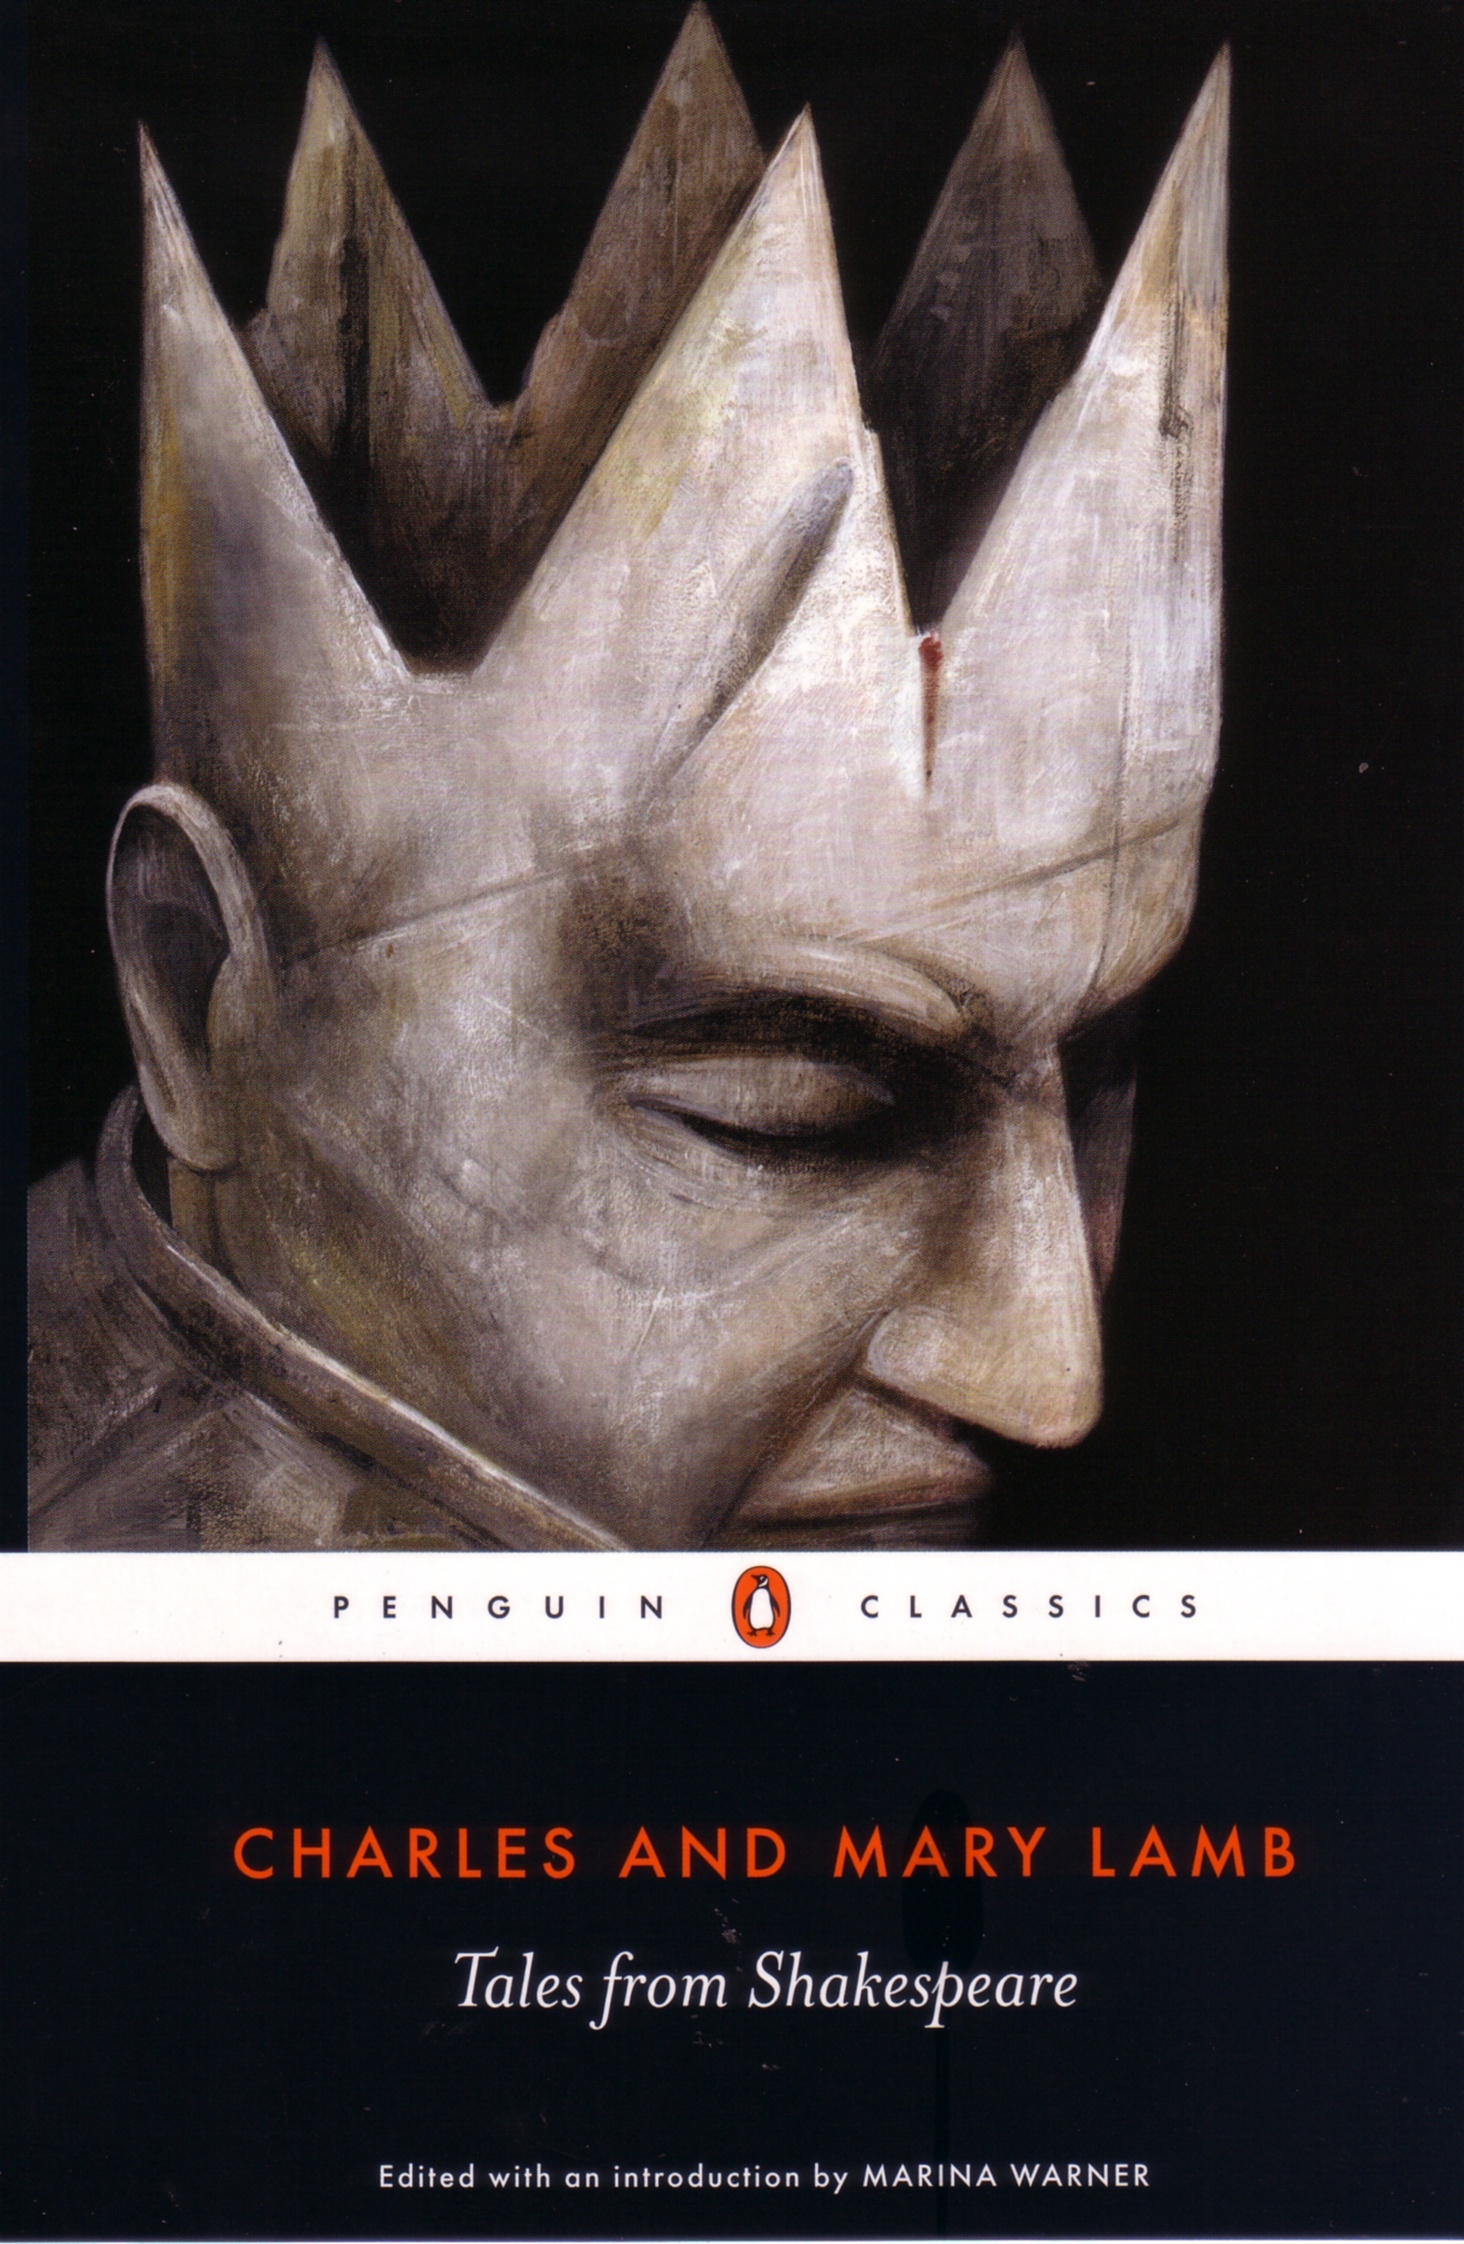 tales from shakespeare by charles lamb and mary lamb